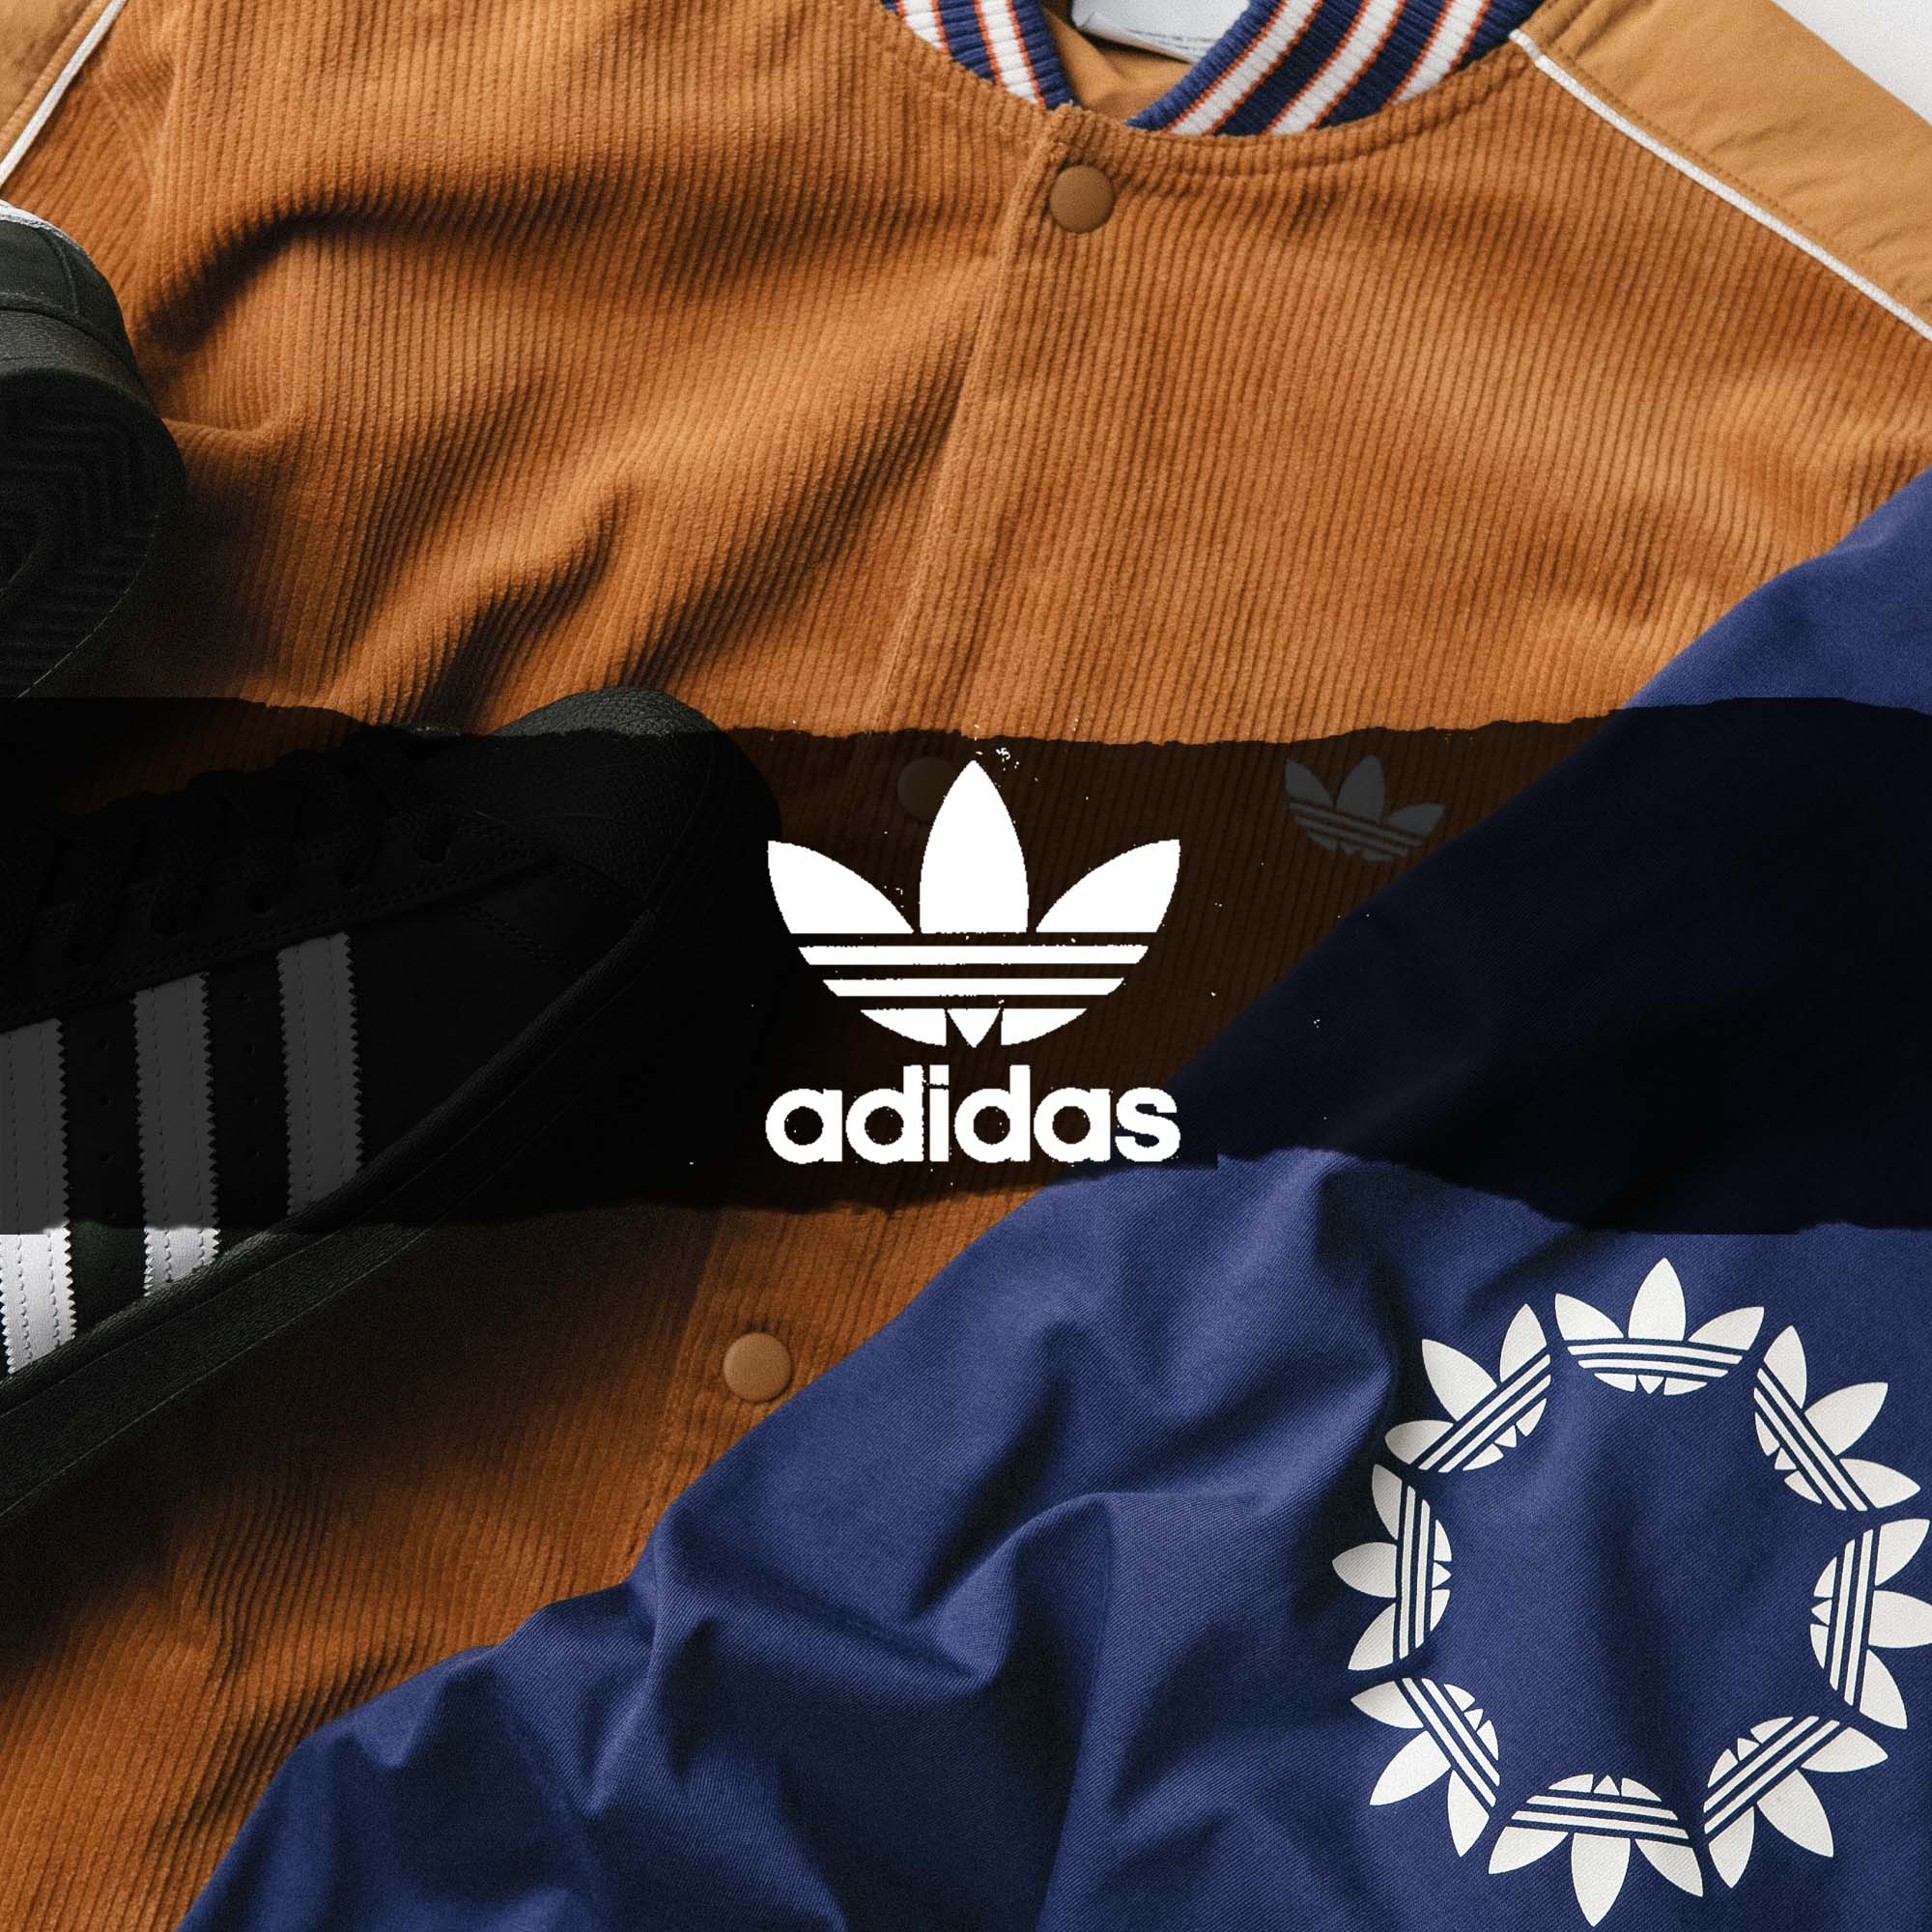 adidas overview